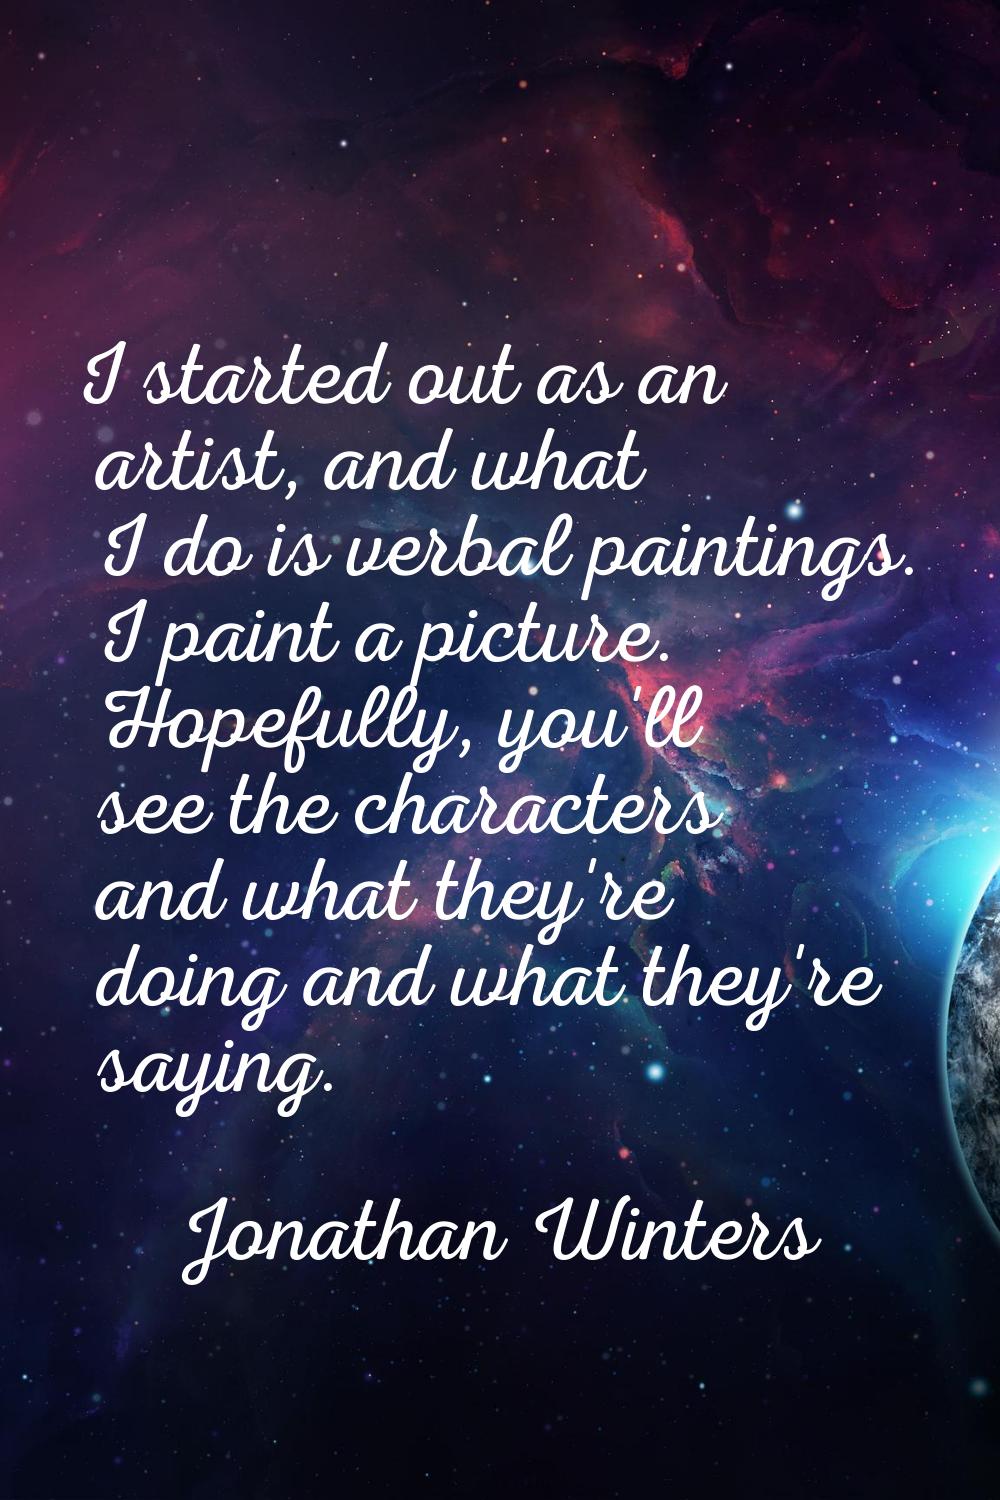 I started out as an artist, and what I do is verbal paintings. I paint a picture. Hopefully, you'll